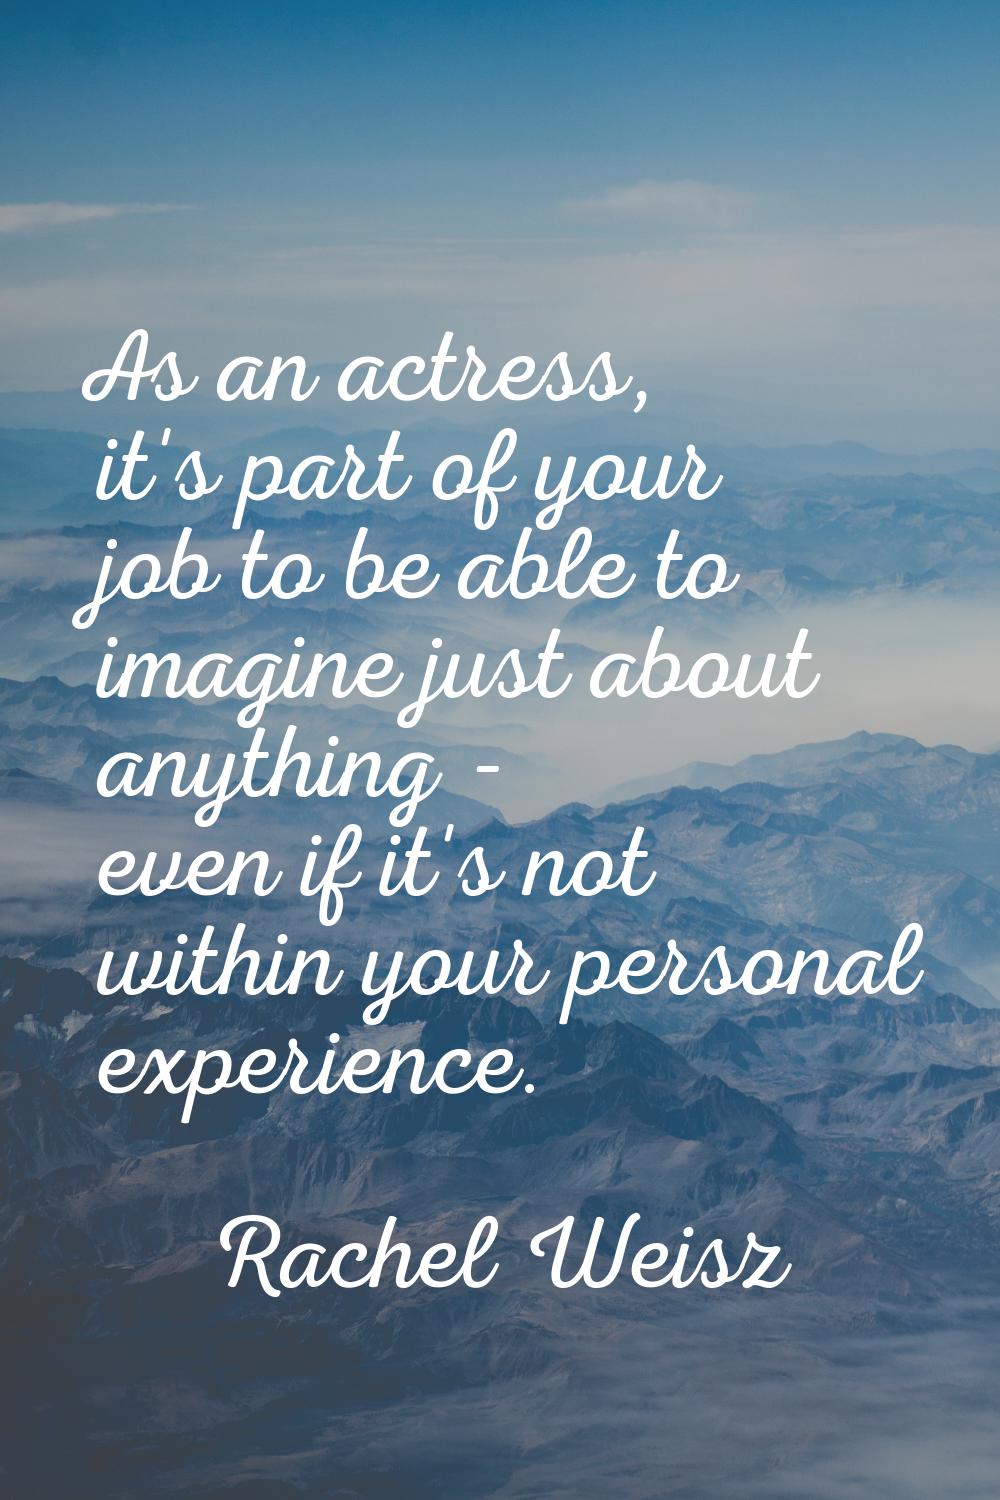 As an actress, it's part of your job to be able to imagine just about anything - even if it's not w